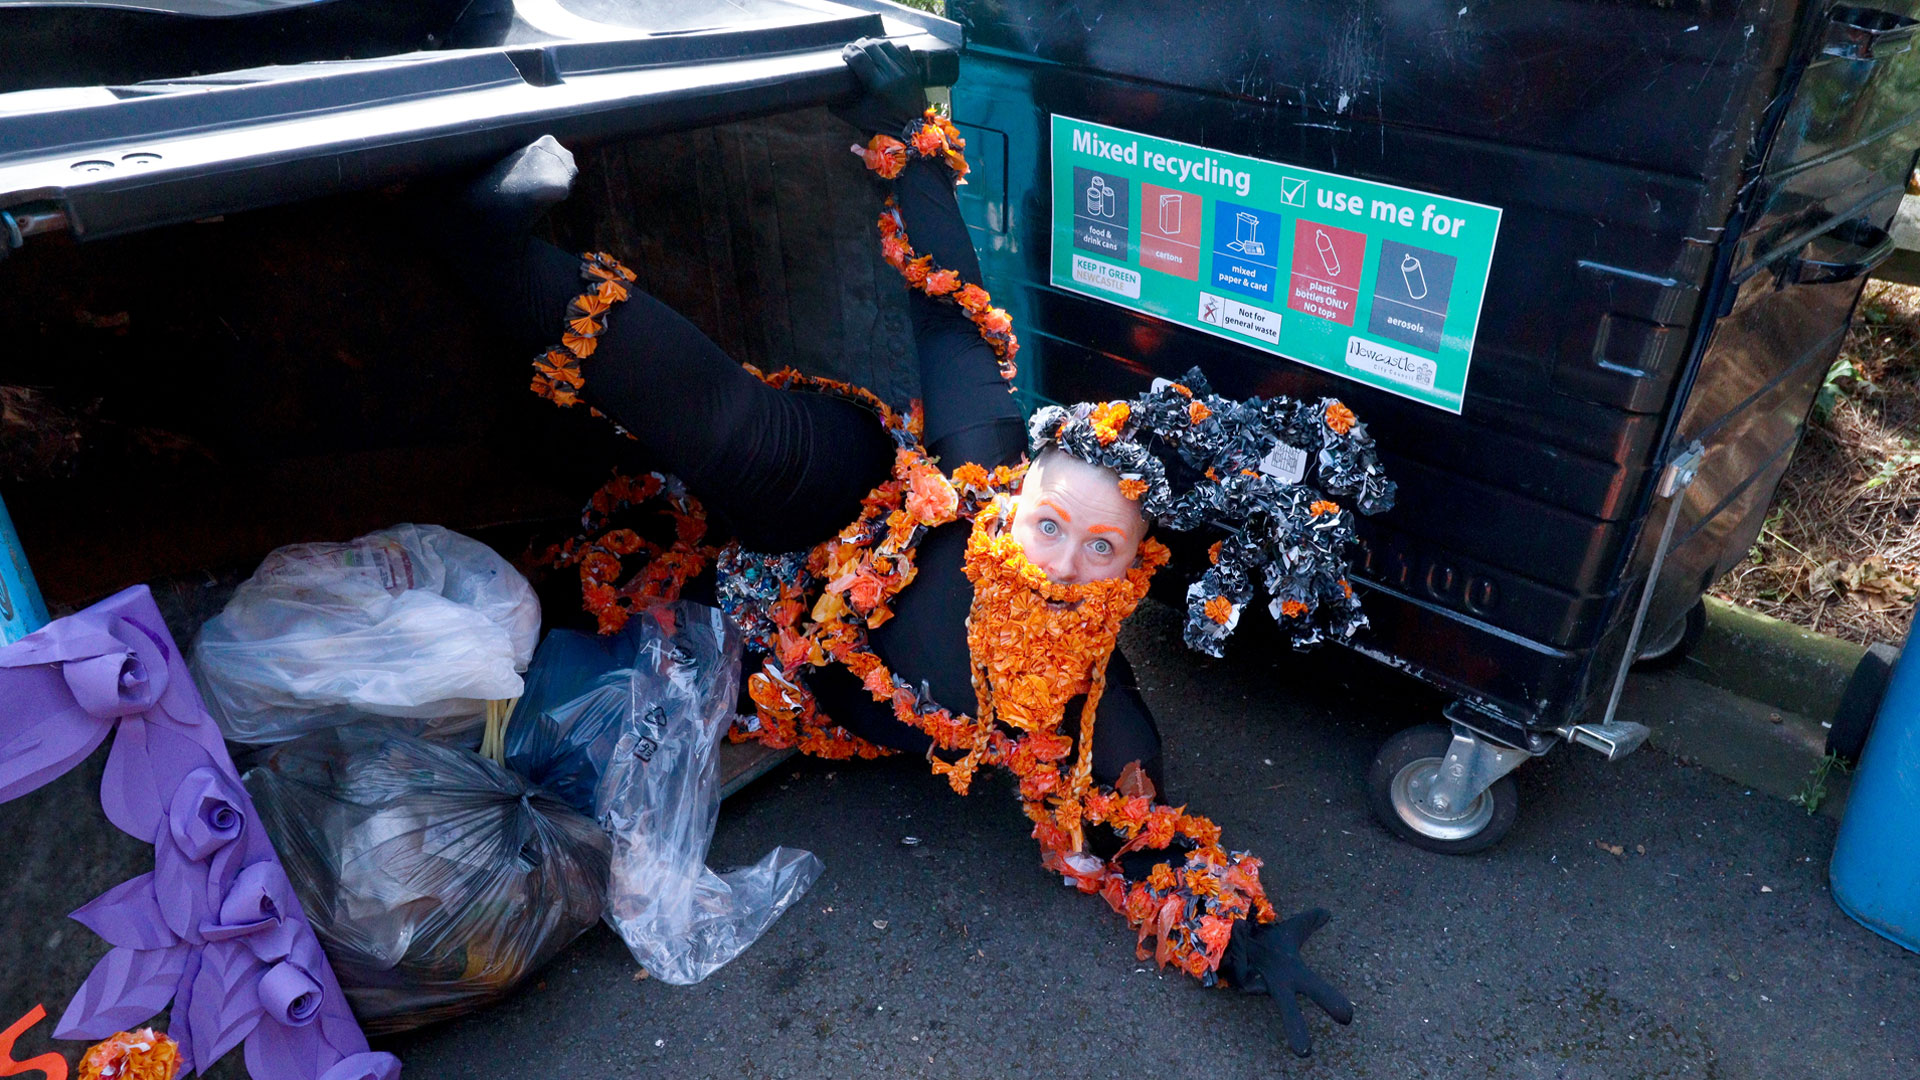 Kitt, white human coming out of an industrial size bin with arms outstretched. They are wearing a headdress, beard and garlands of flowers handmade from recycled black and orange plastic bags. Behind their head is another bin with a vinyl sign which reads mixed recycling and pictures of items that can be put in the bin.